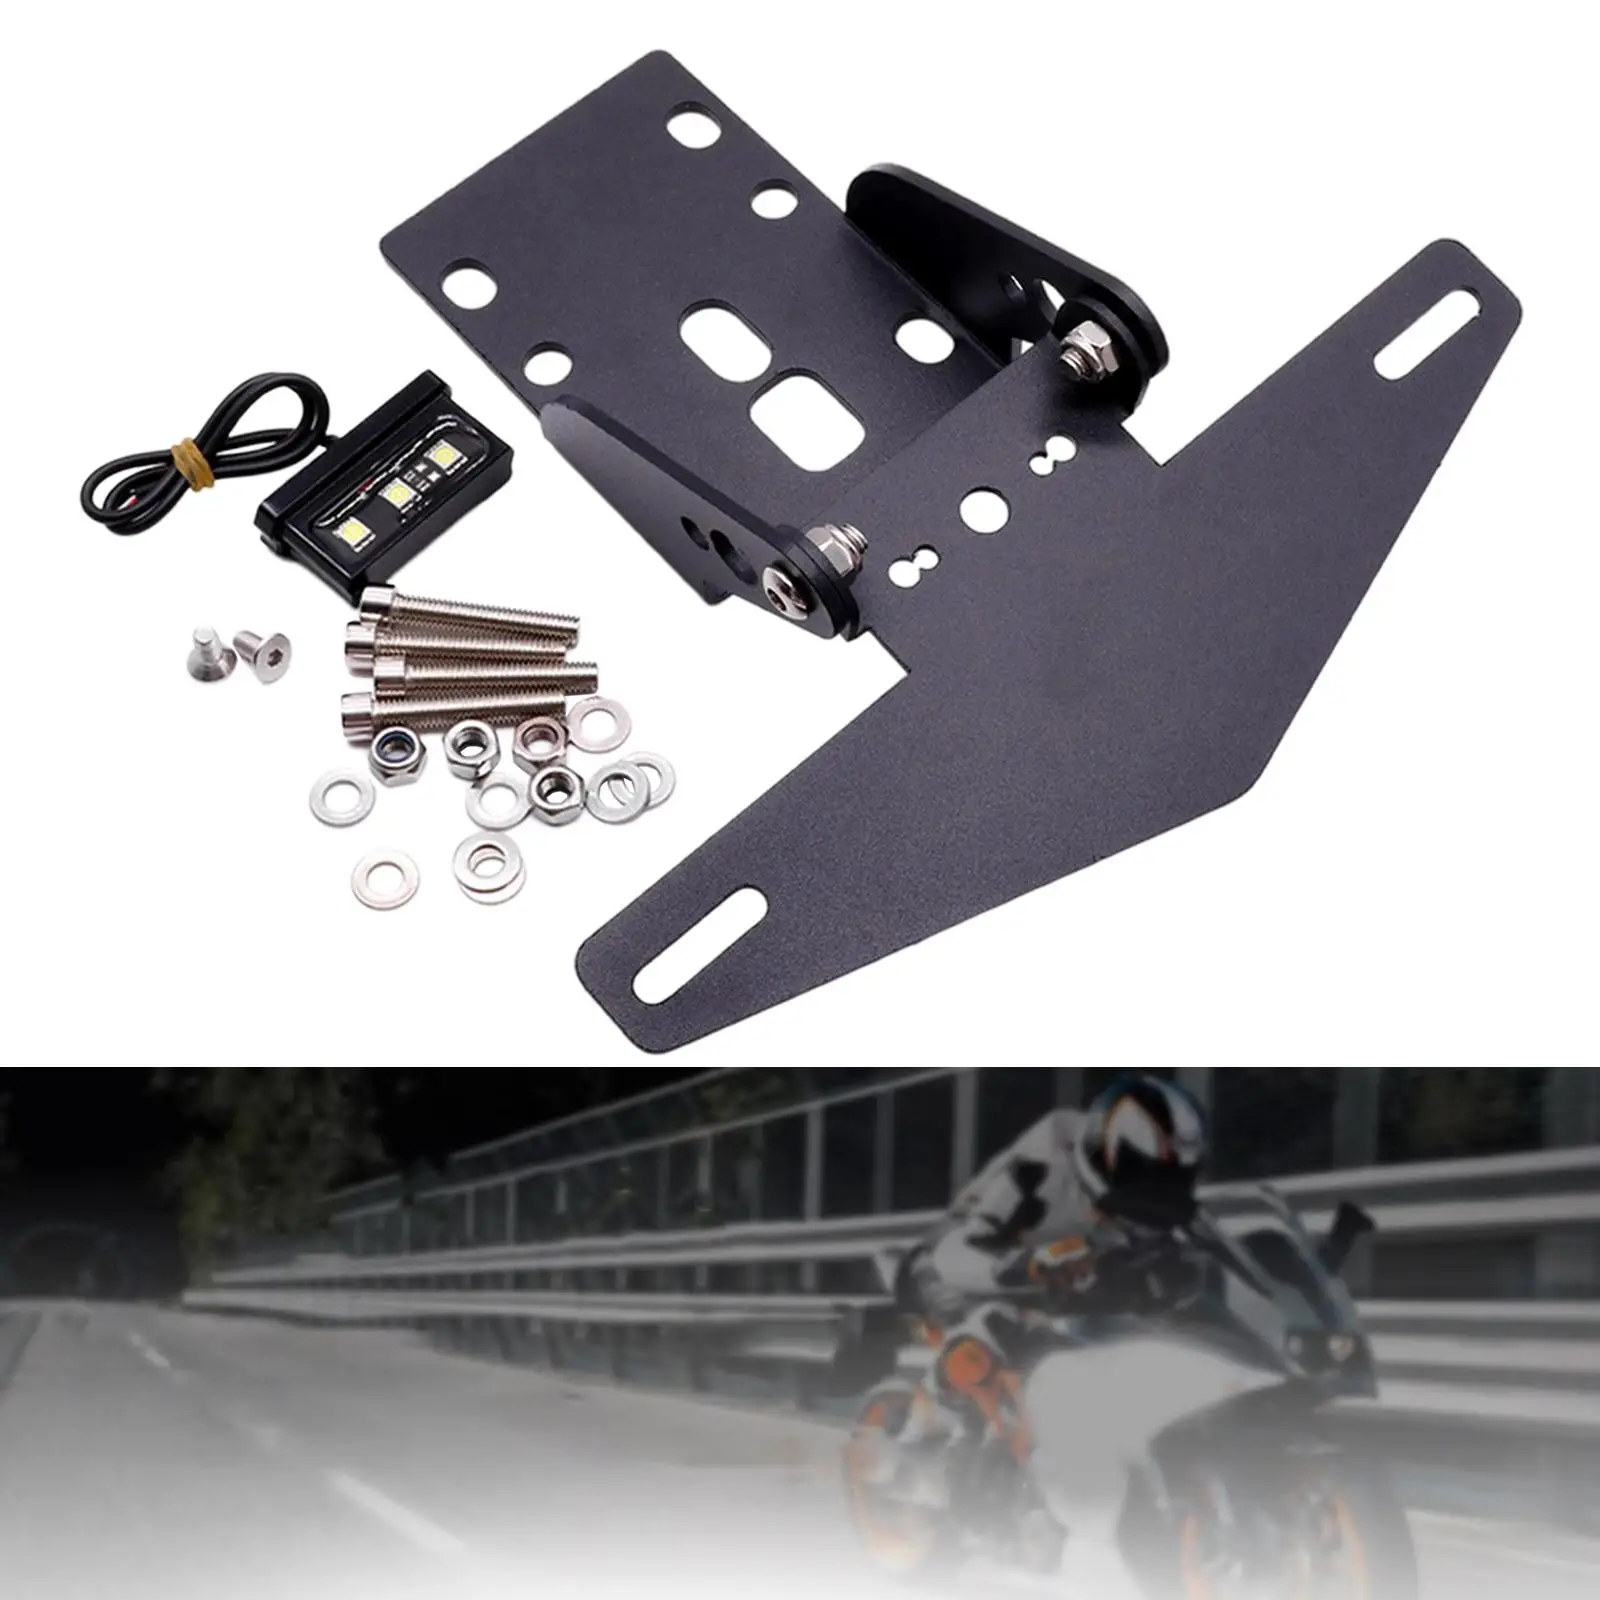 Licence Plate Holder for  125 250 390 Tail Tidy with LED Light Black